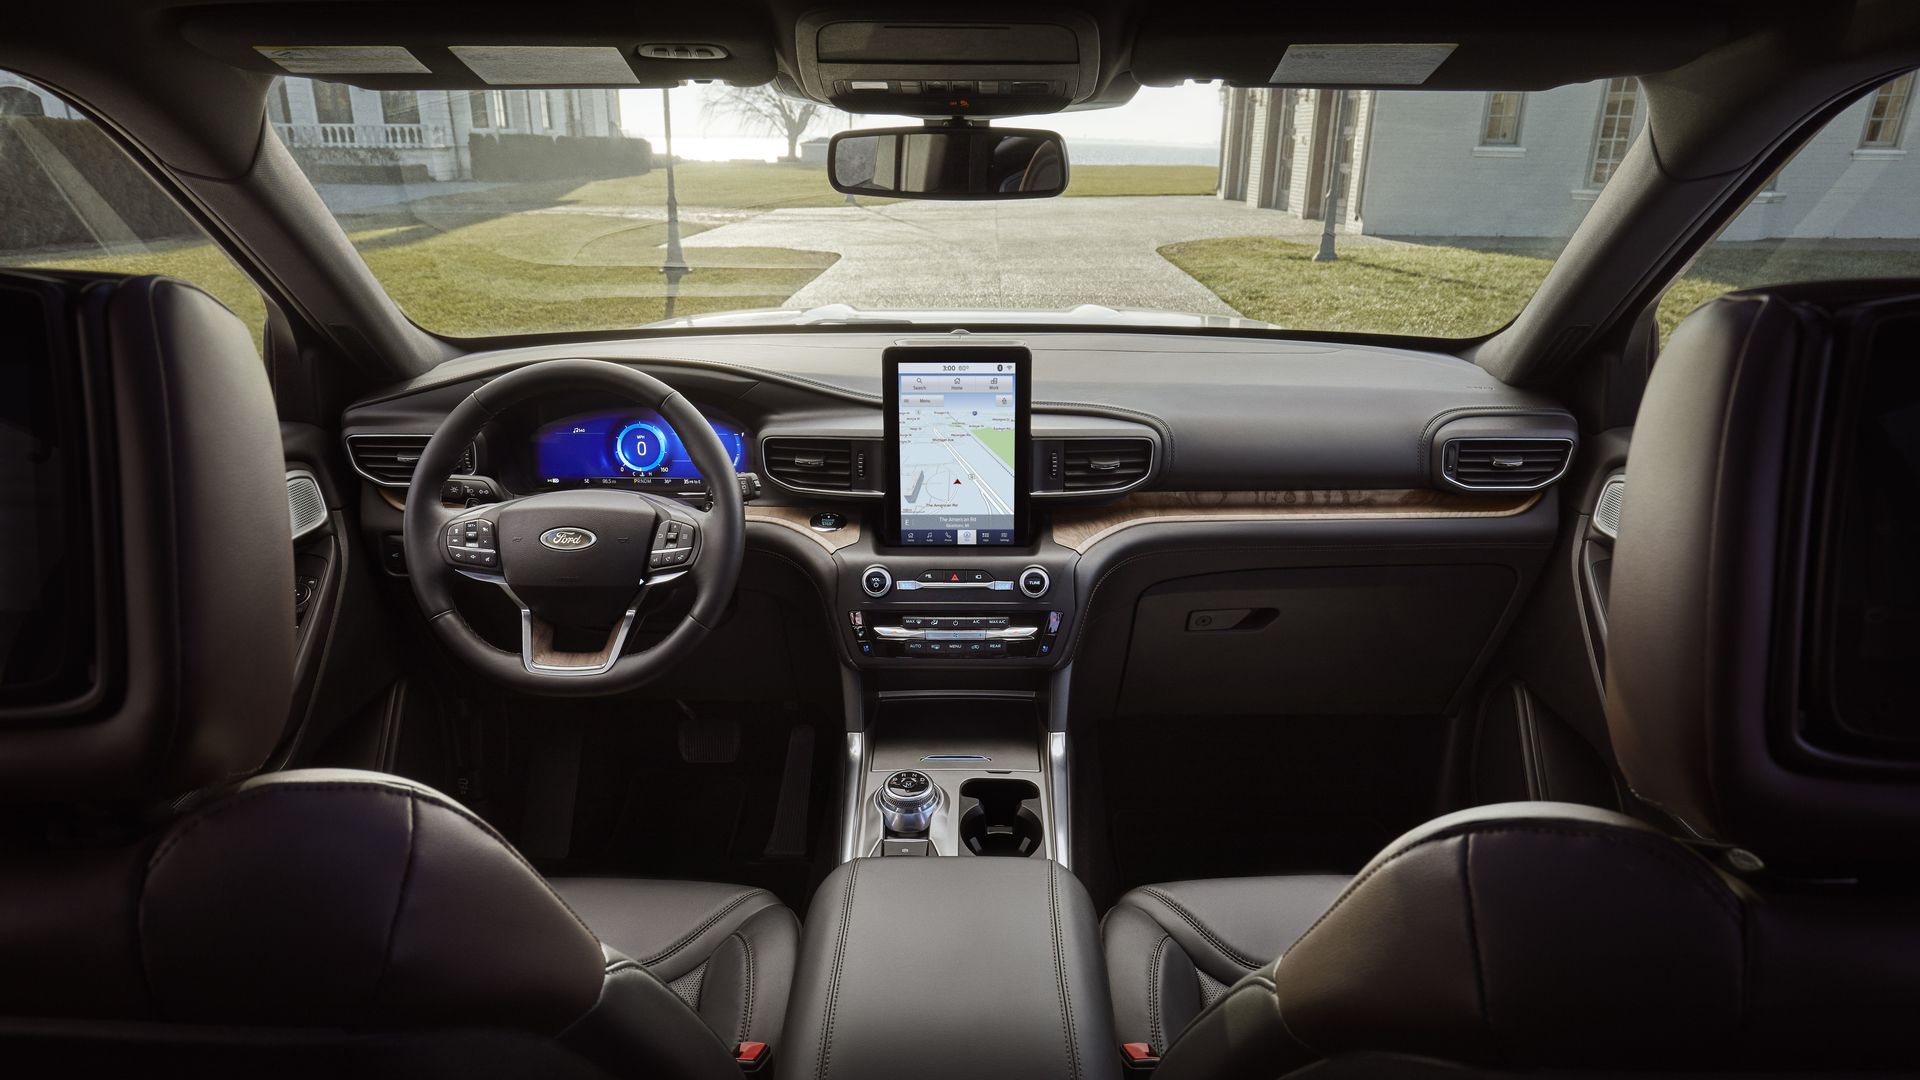 Interior view of 2020 Ford Explorer, with portrait-style touchscreen